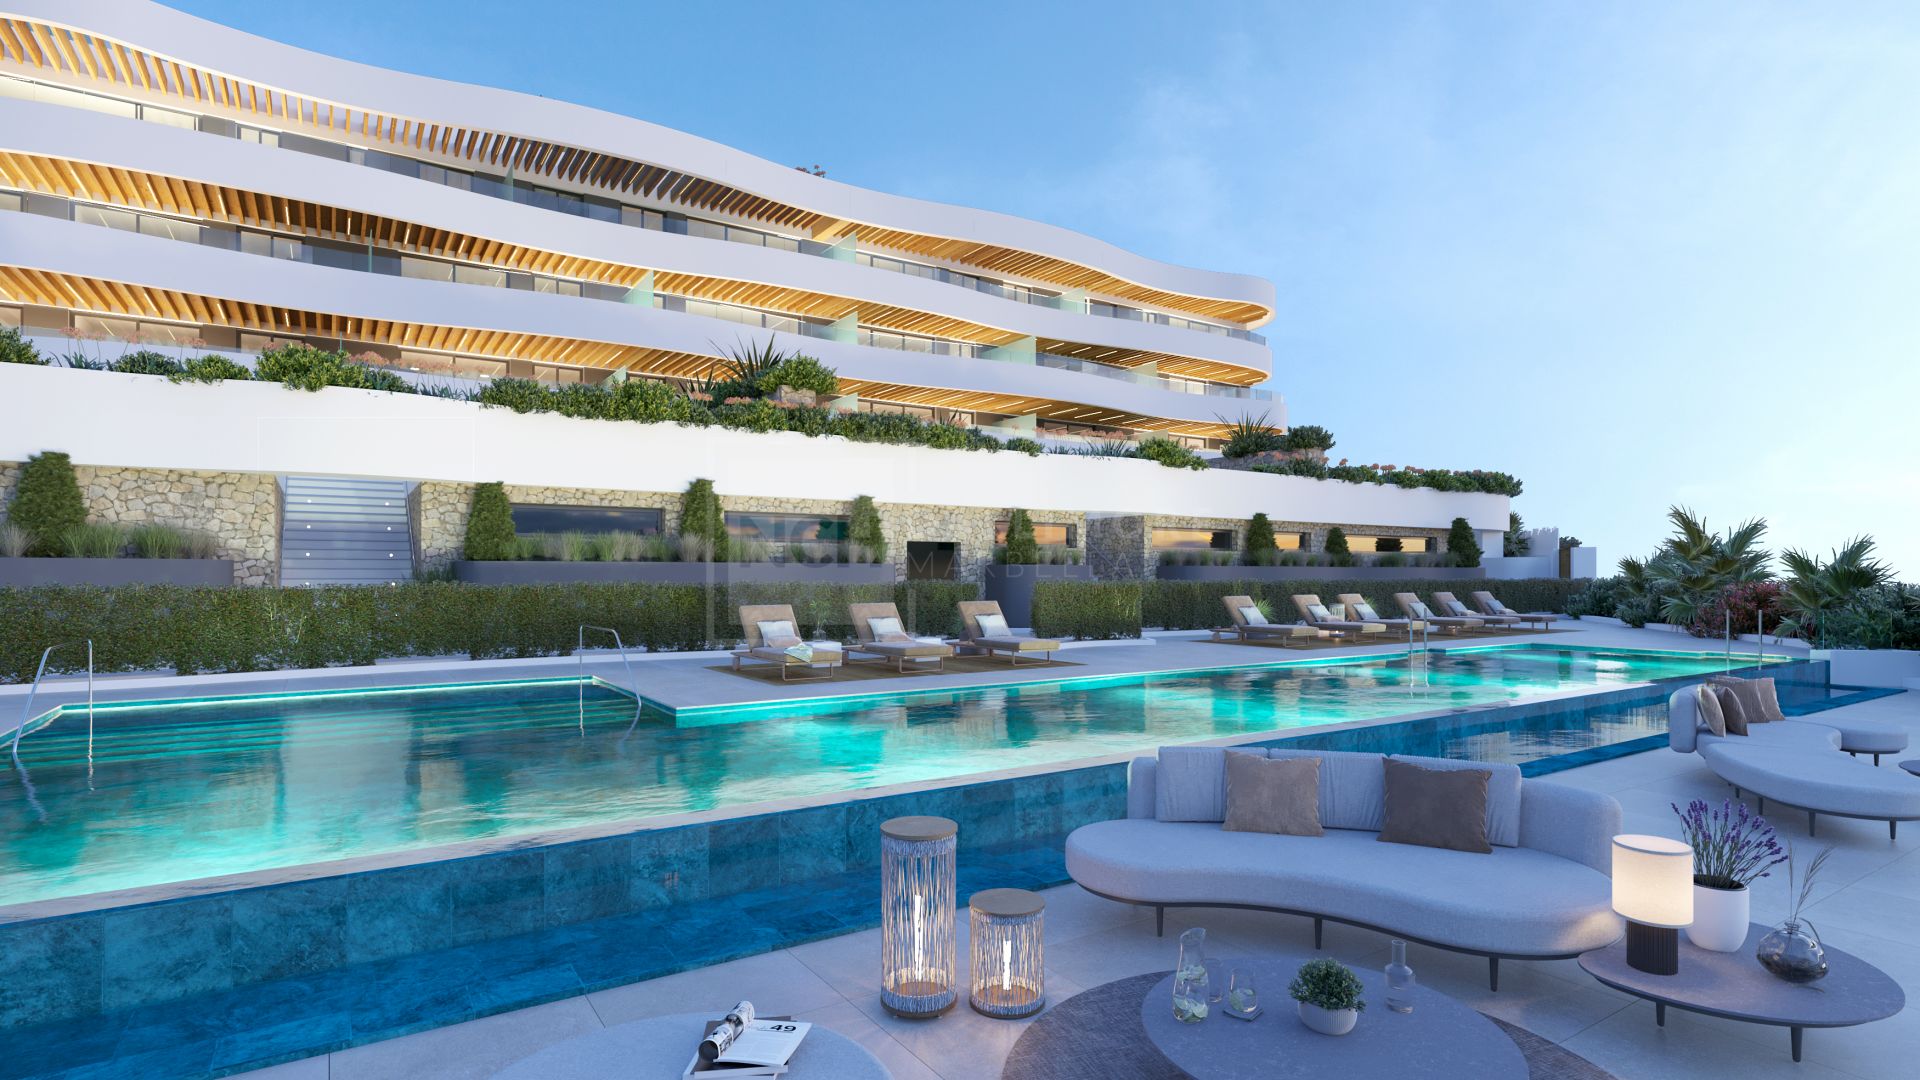 STRIKING BRAND NEW 2- BEDROOM CONTEMPORARY APARTMENT FOR SALE IN MIJAS COSTA